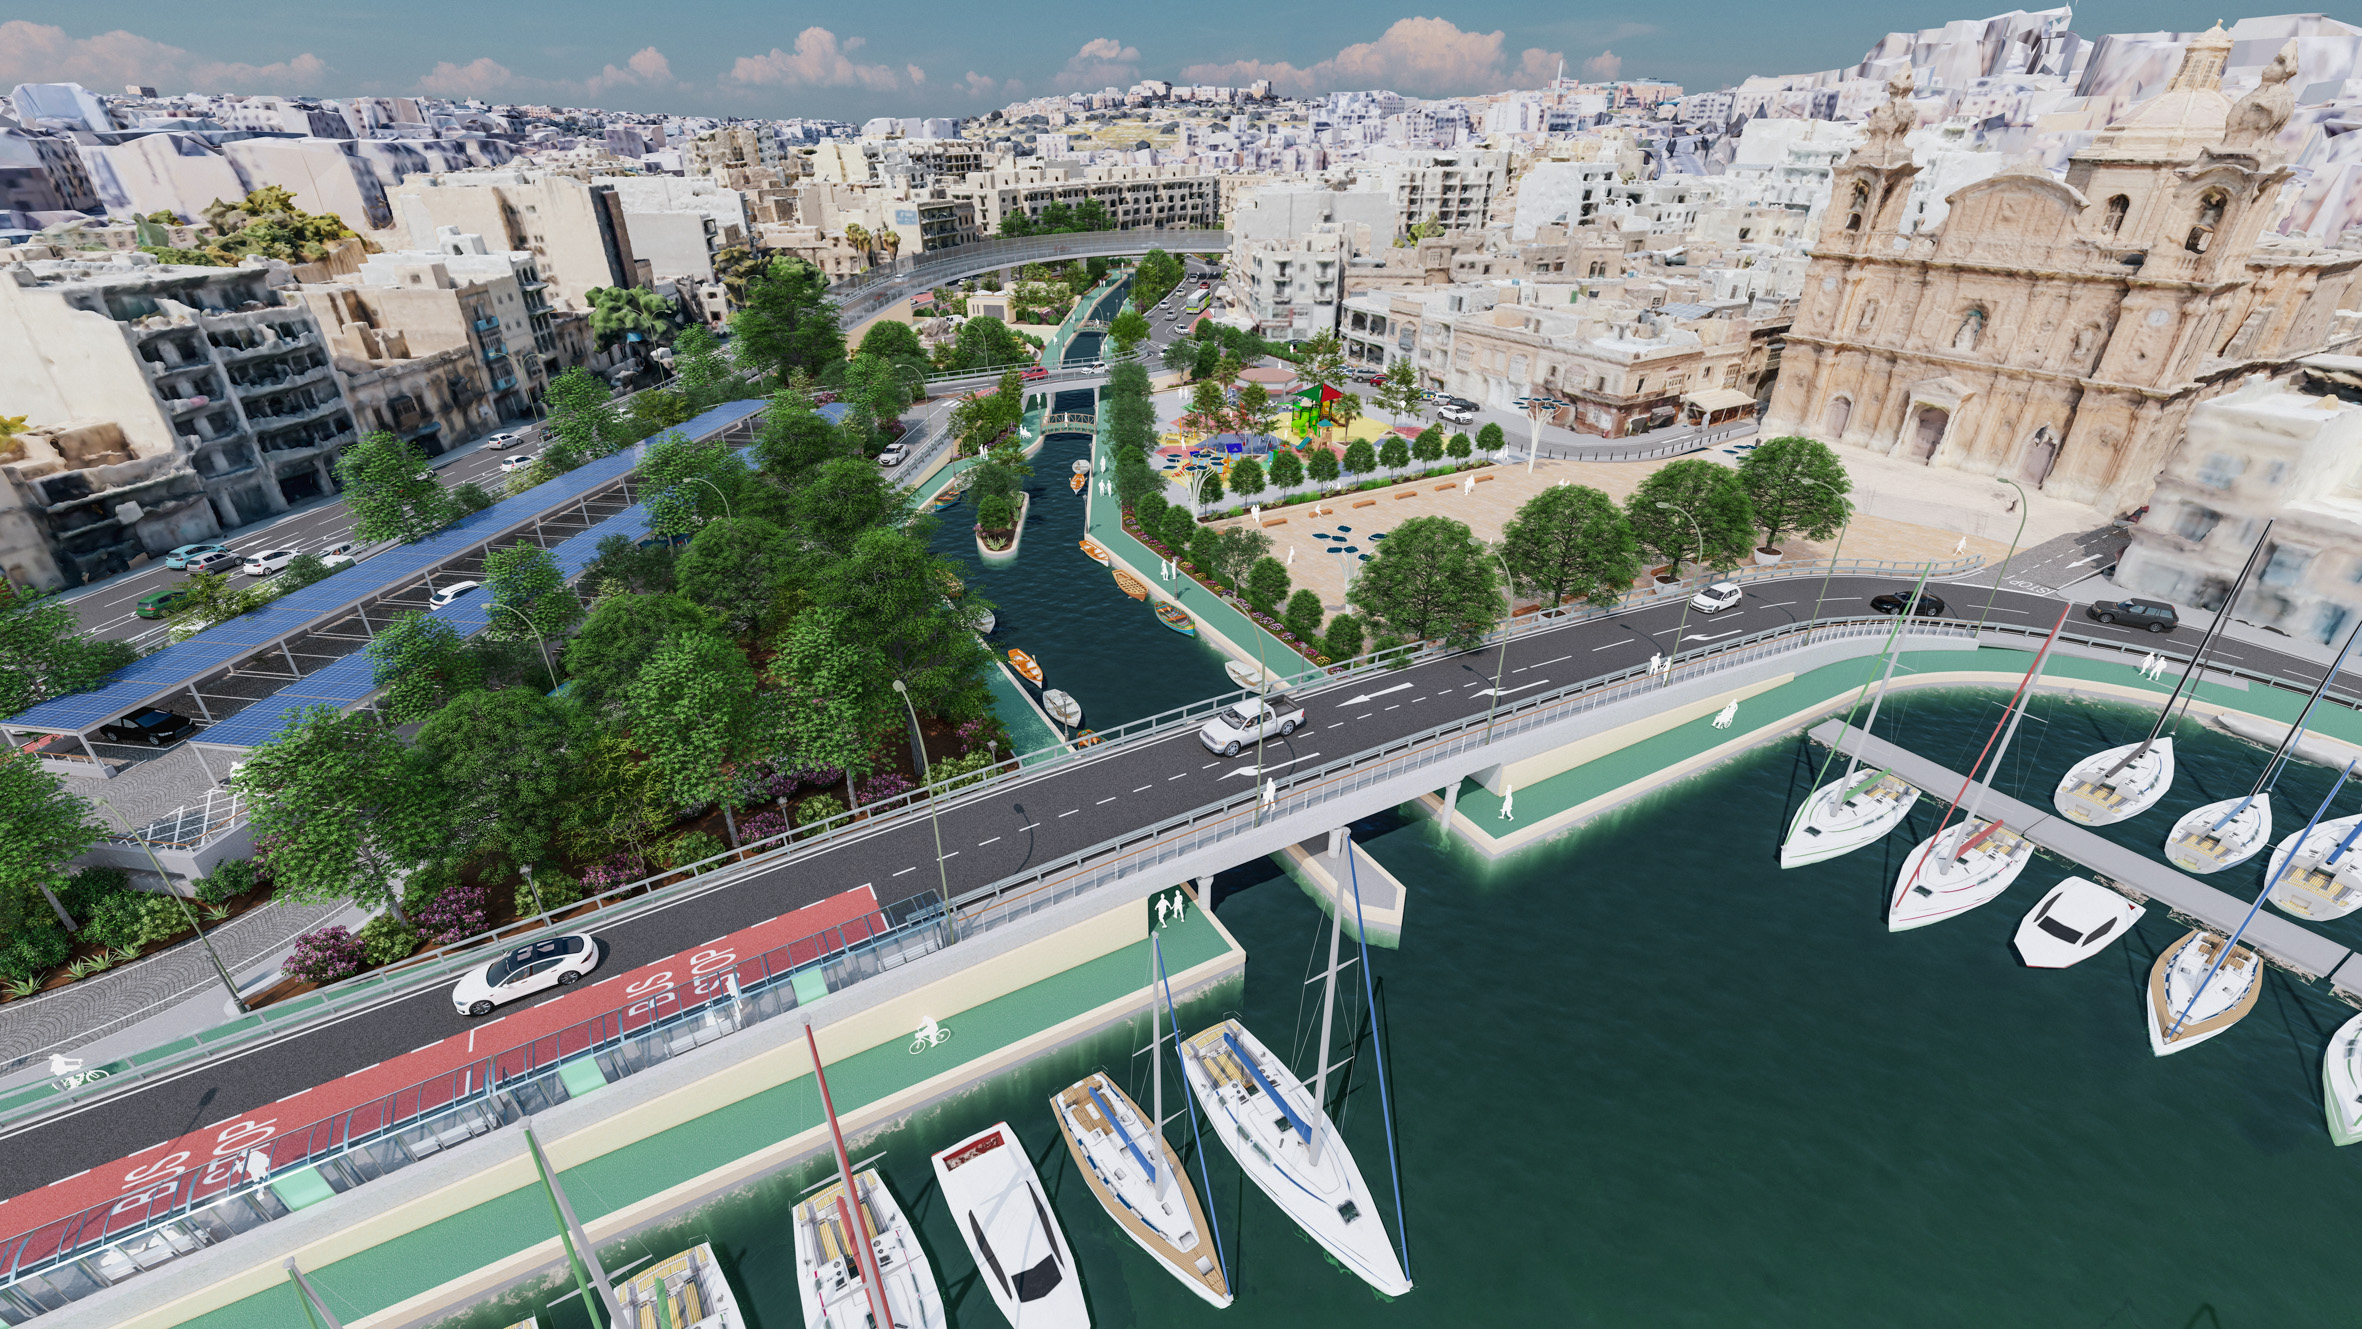 Infrastructure Malta welcomes positive response to Msida Creek Project tender